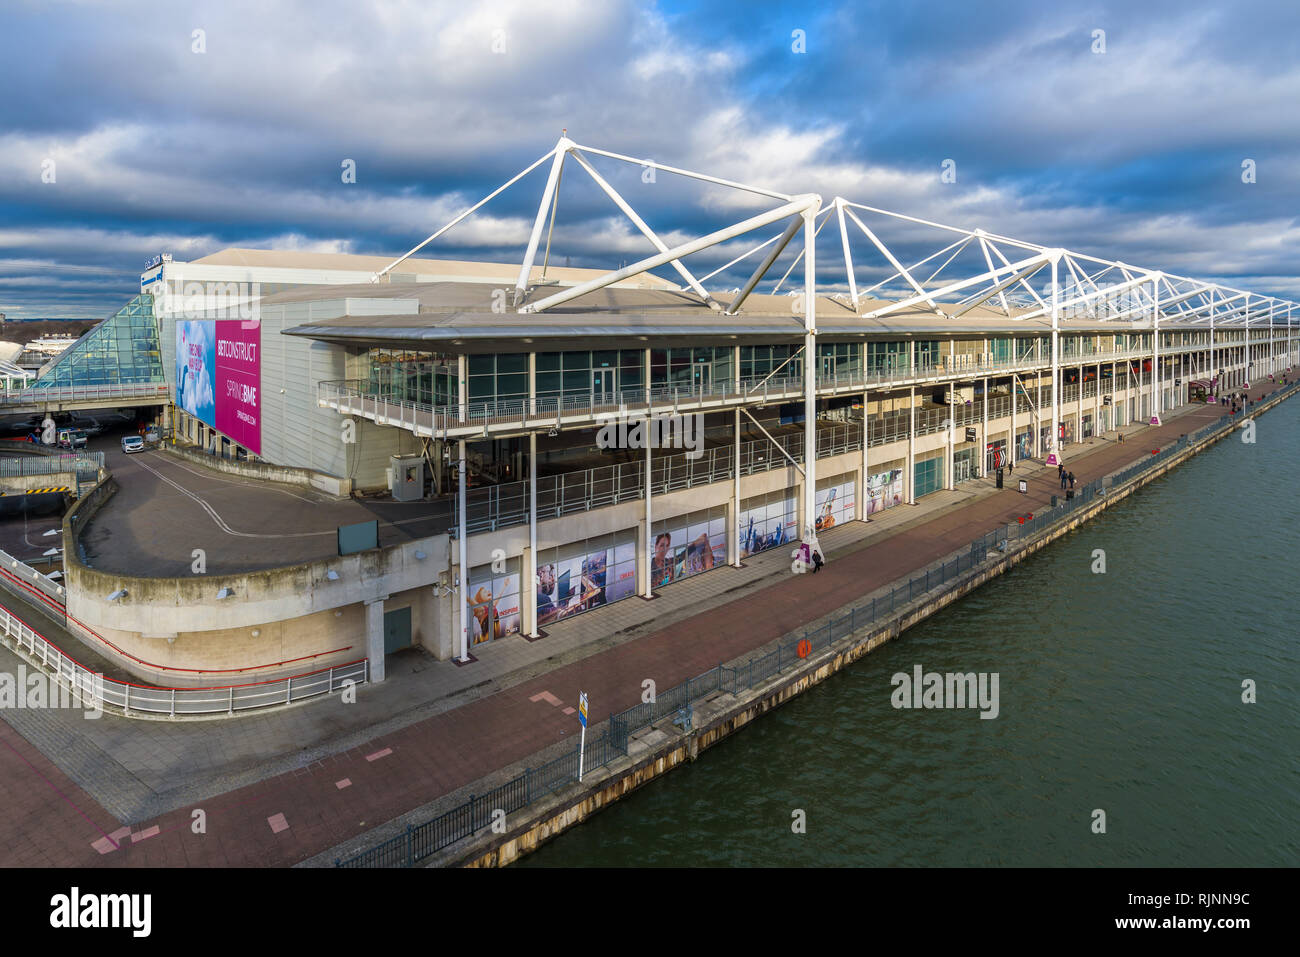 The ExCeL Centre, exhibition and international convention centre situated near Royal Victoria Dock, London Docklands, East London, England. Stock Photo